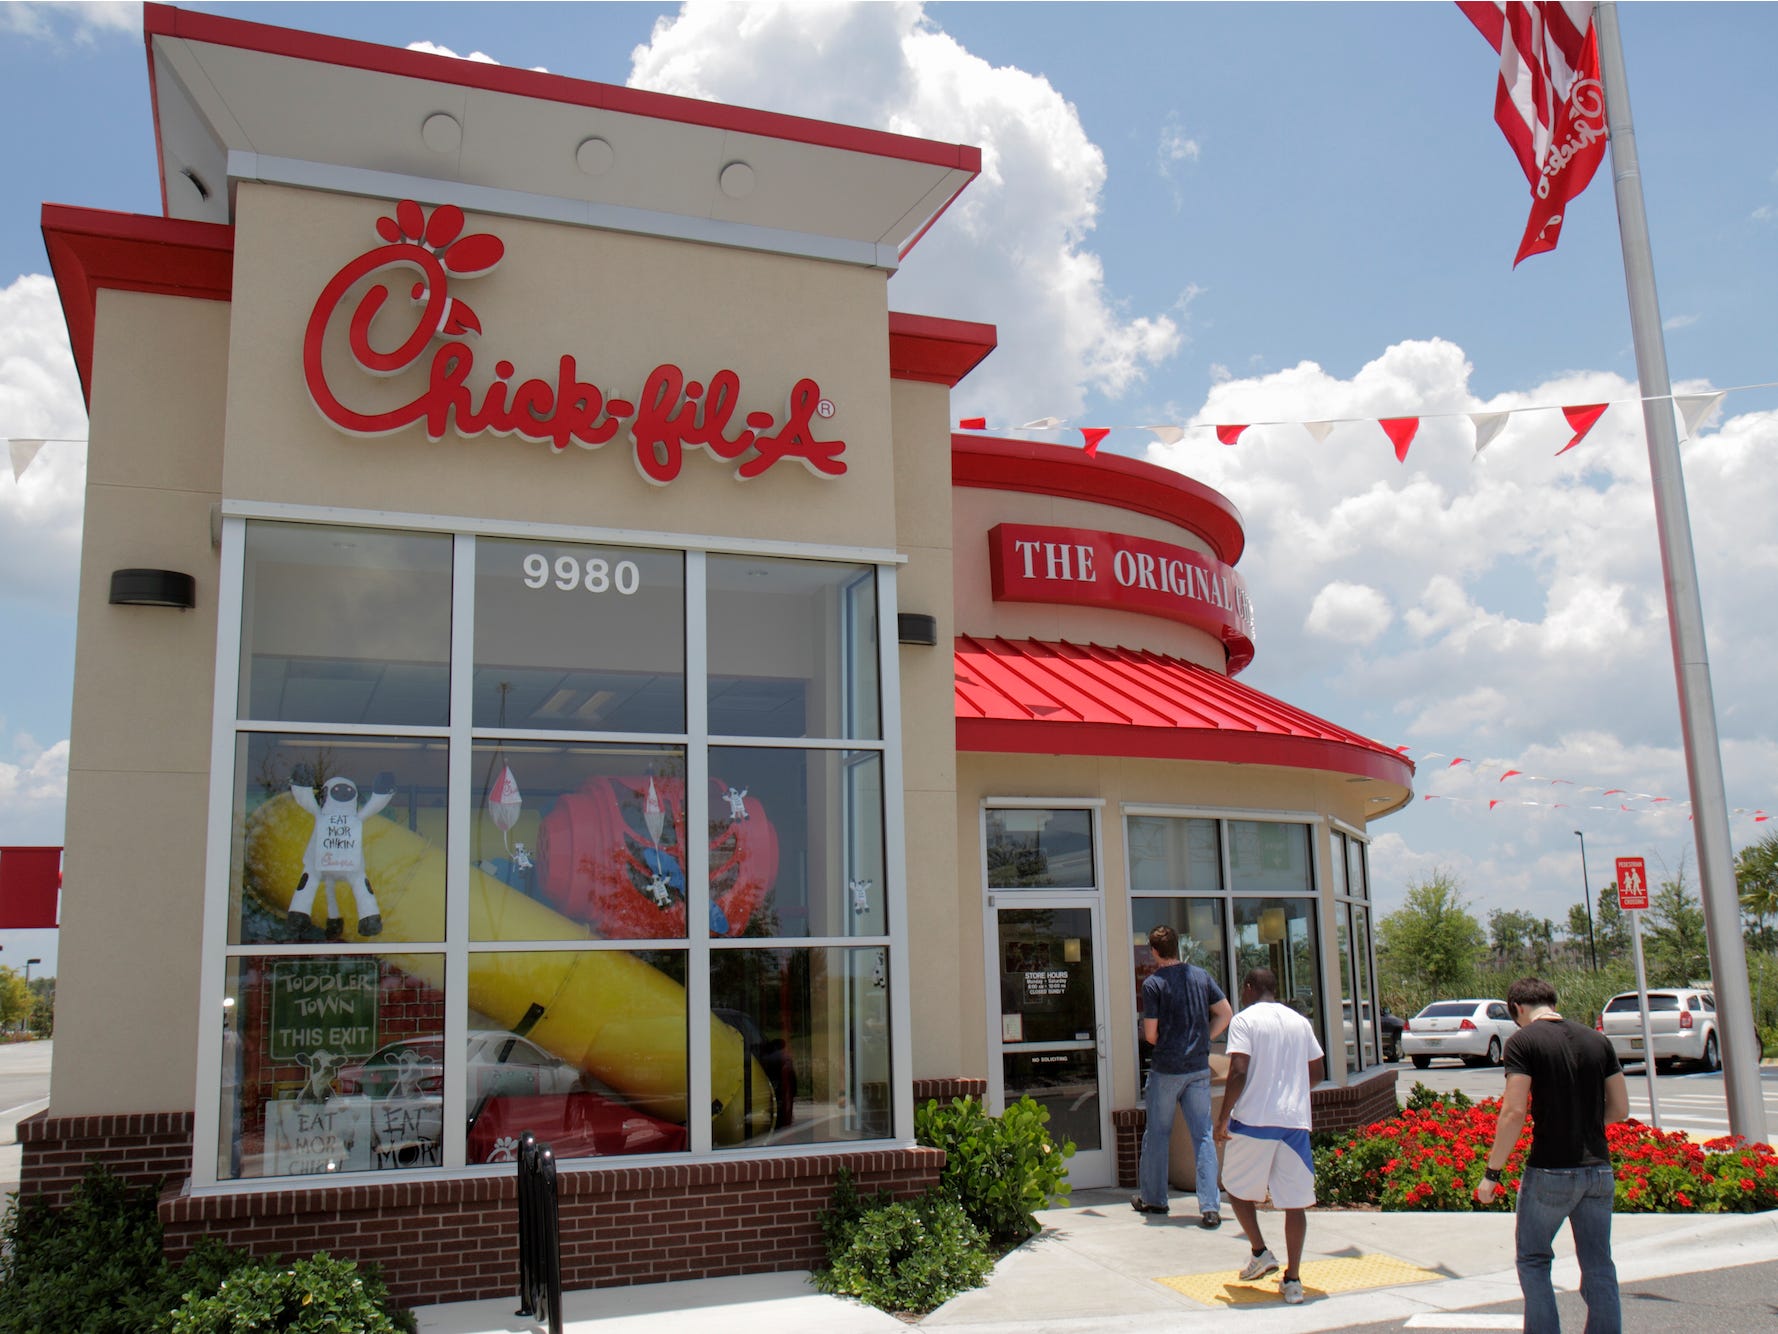 <p>Today, the chain has more than 2,800 restaurants in the US, Puerto Rico, and Canada. In September 2023, the chain announced plans to expand to Europe, the UK and Asia.</p><p><em>Source: <a href="https://thechickenwire.chick-fil-a.com/Press-Room" rel="noopener">Chick-fil-A </a></em><em>and <a href="https://www.businessinsider.com/chick-fil-a-plans-uk-return-after-past-anti-lgbtq-controversy-2023-9" rel="noopener">Insider</a></em></p>